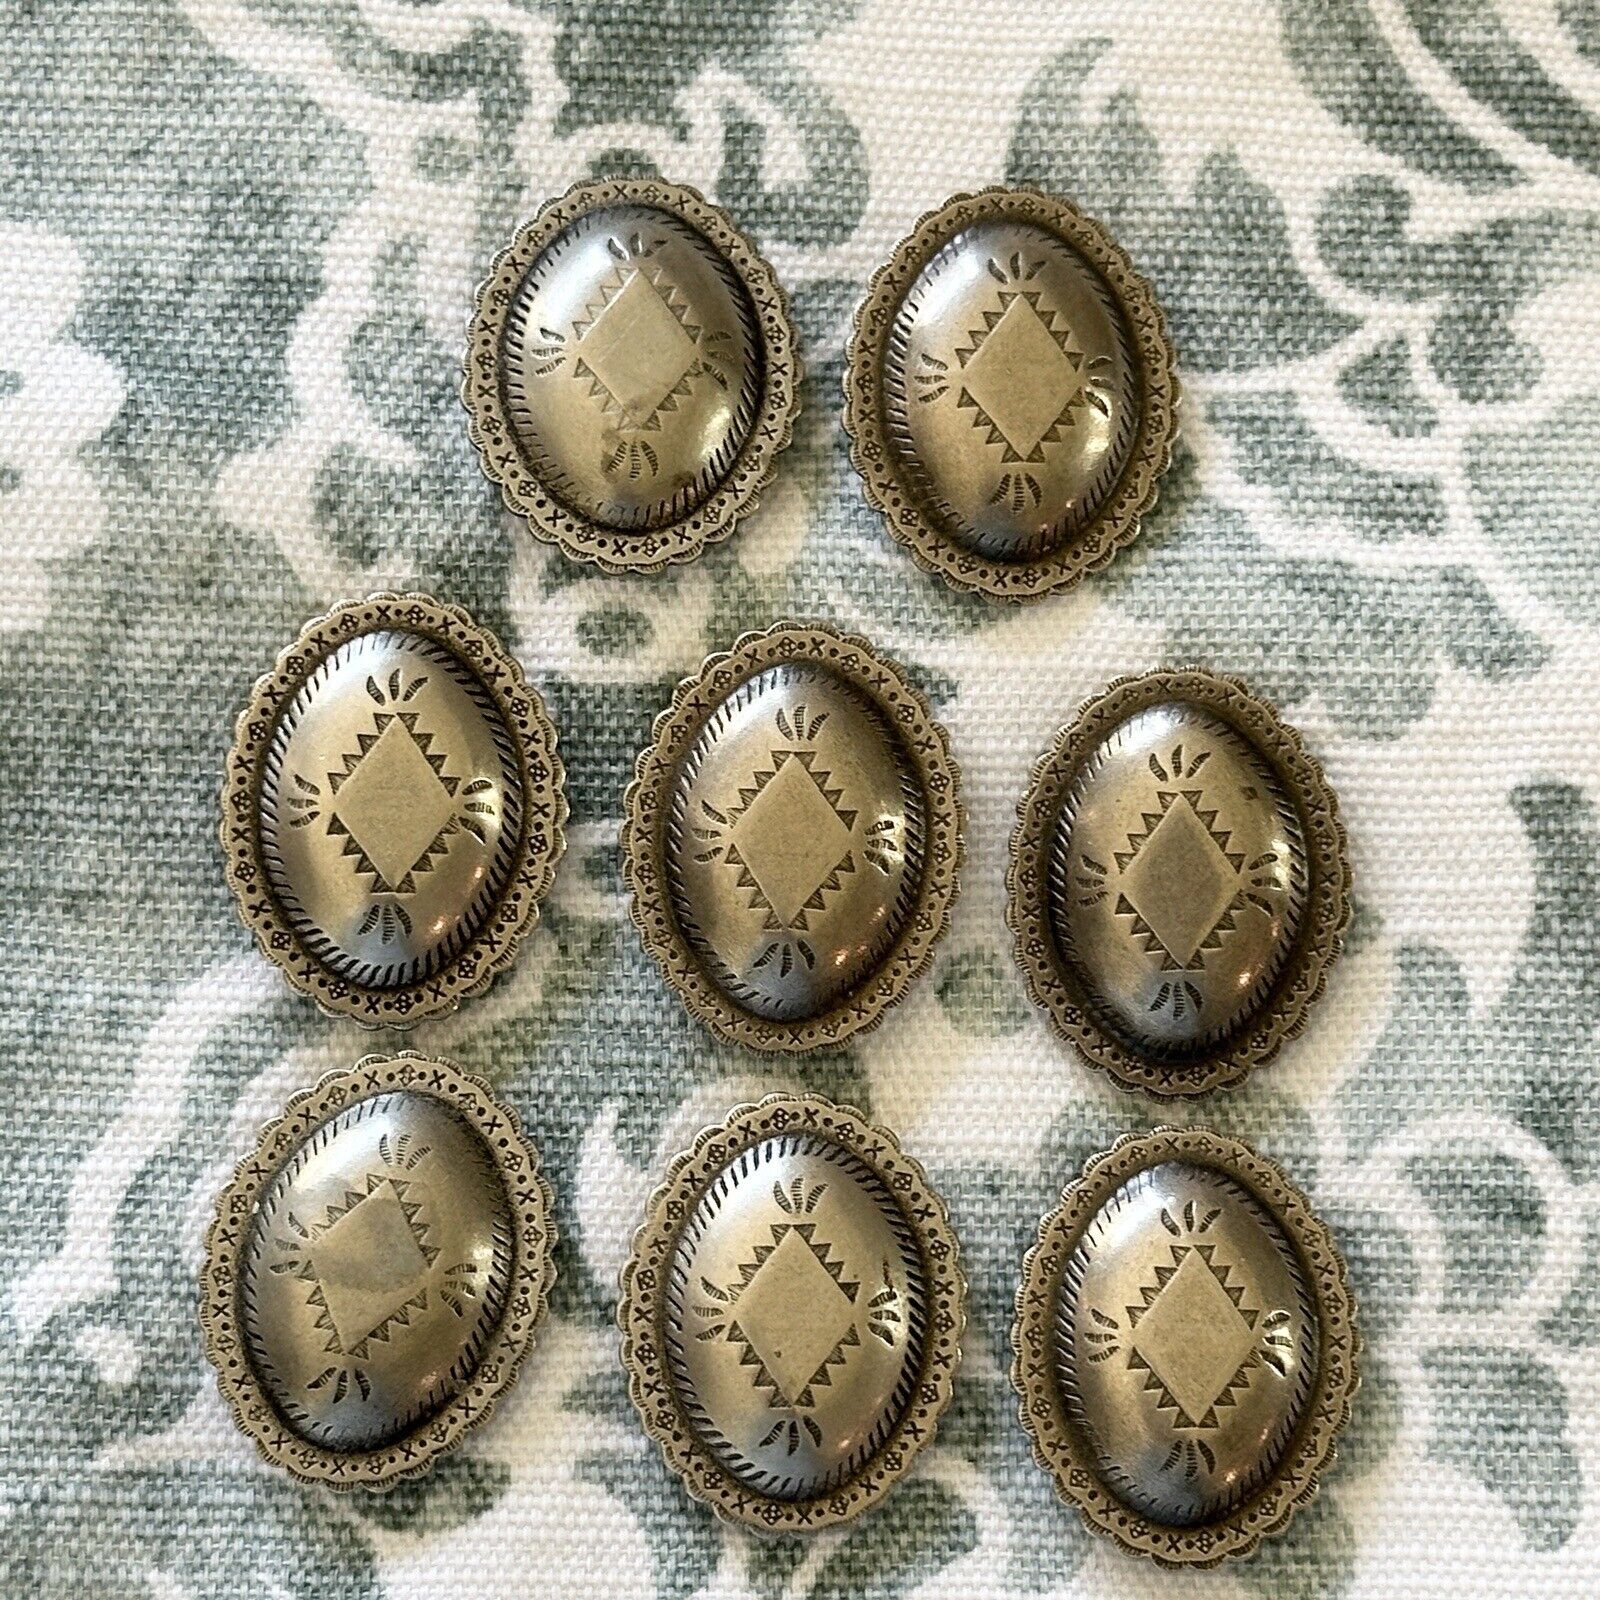 VTG Navajo Native American Button Covers Sterling Silver Conchos Oval Lot Of 8